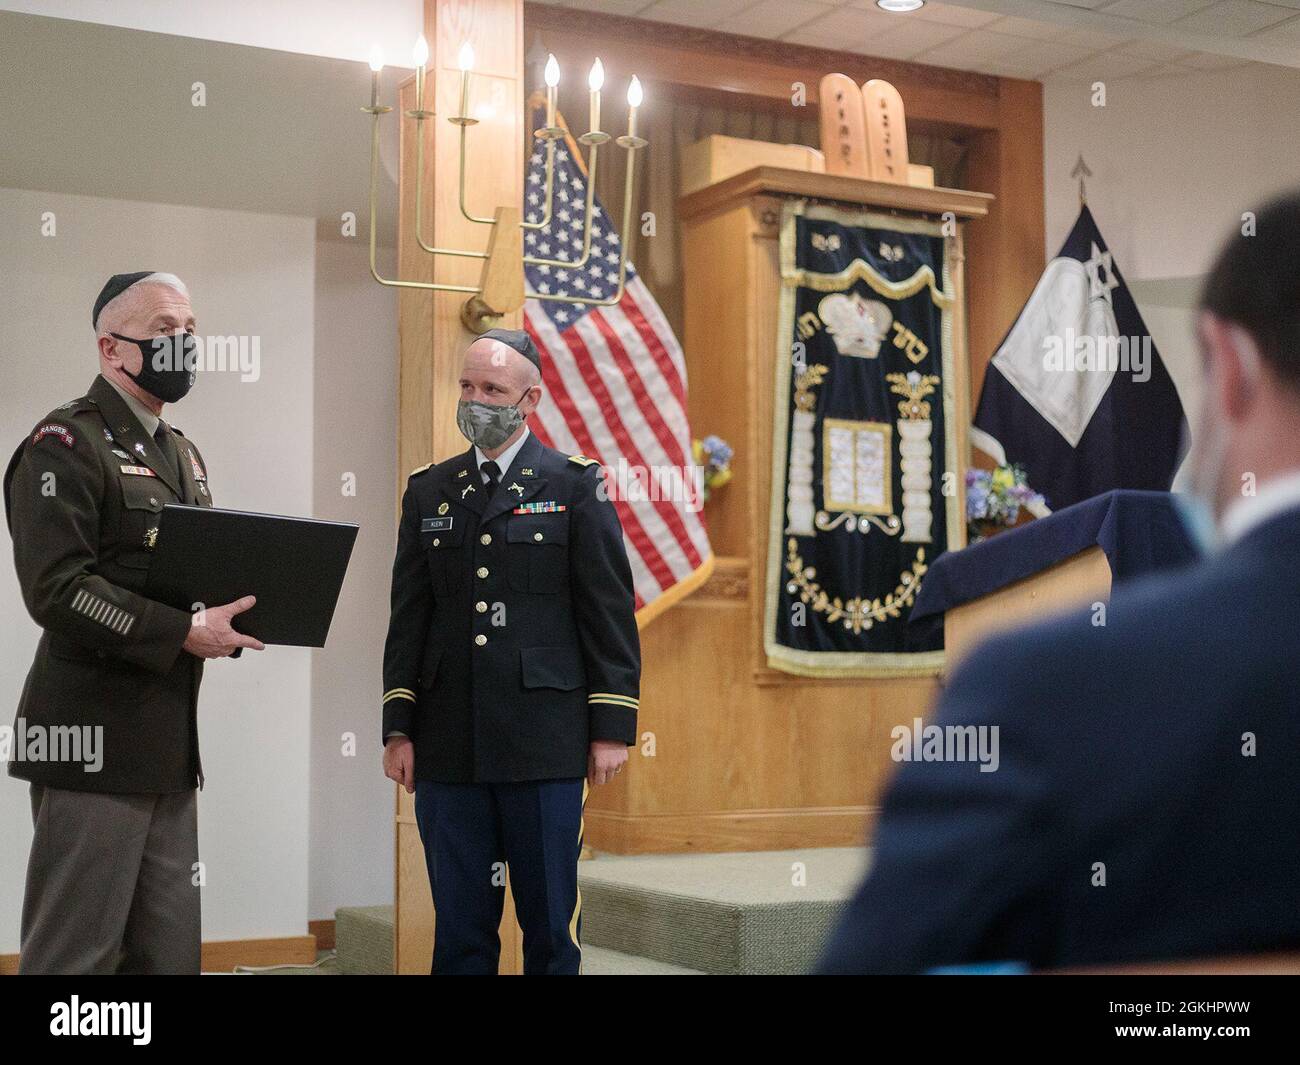 First Lt. Scott Klein, the Fort Bliss Jewish distinctive religious group leader, receives a commendation from Chaplain (Maj. Gen.) Thomas Solhjem, the U.S. Army Chief of Chaplains, at Chapel 3 at Fort Bliss, Texas, April 26, 2021. The dedication of the Torah scroll, the installation’s first in 20 years, marked the end of a three-month grassroots renovation progress for the synagogue, located at 1441 Pershing Road on west Bliss. Stock Photo